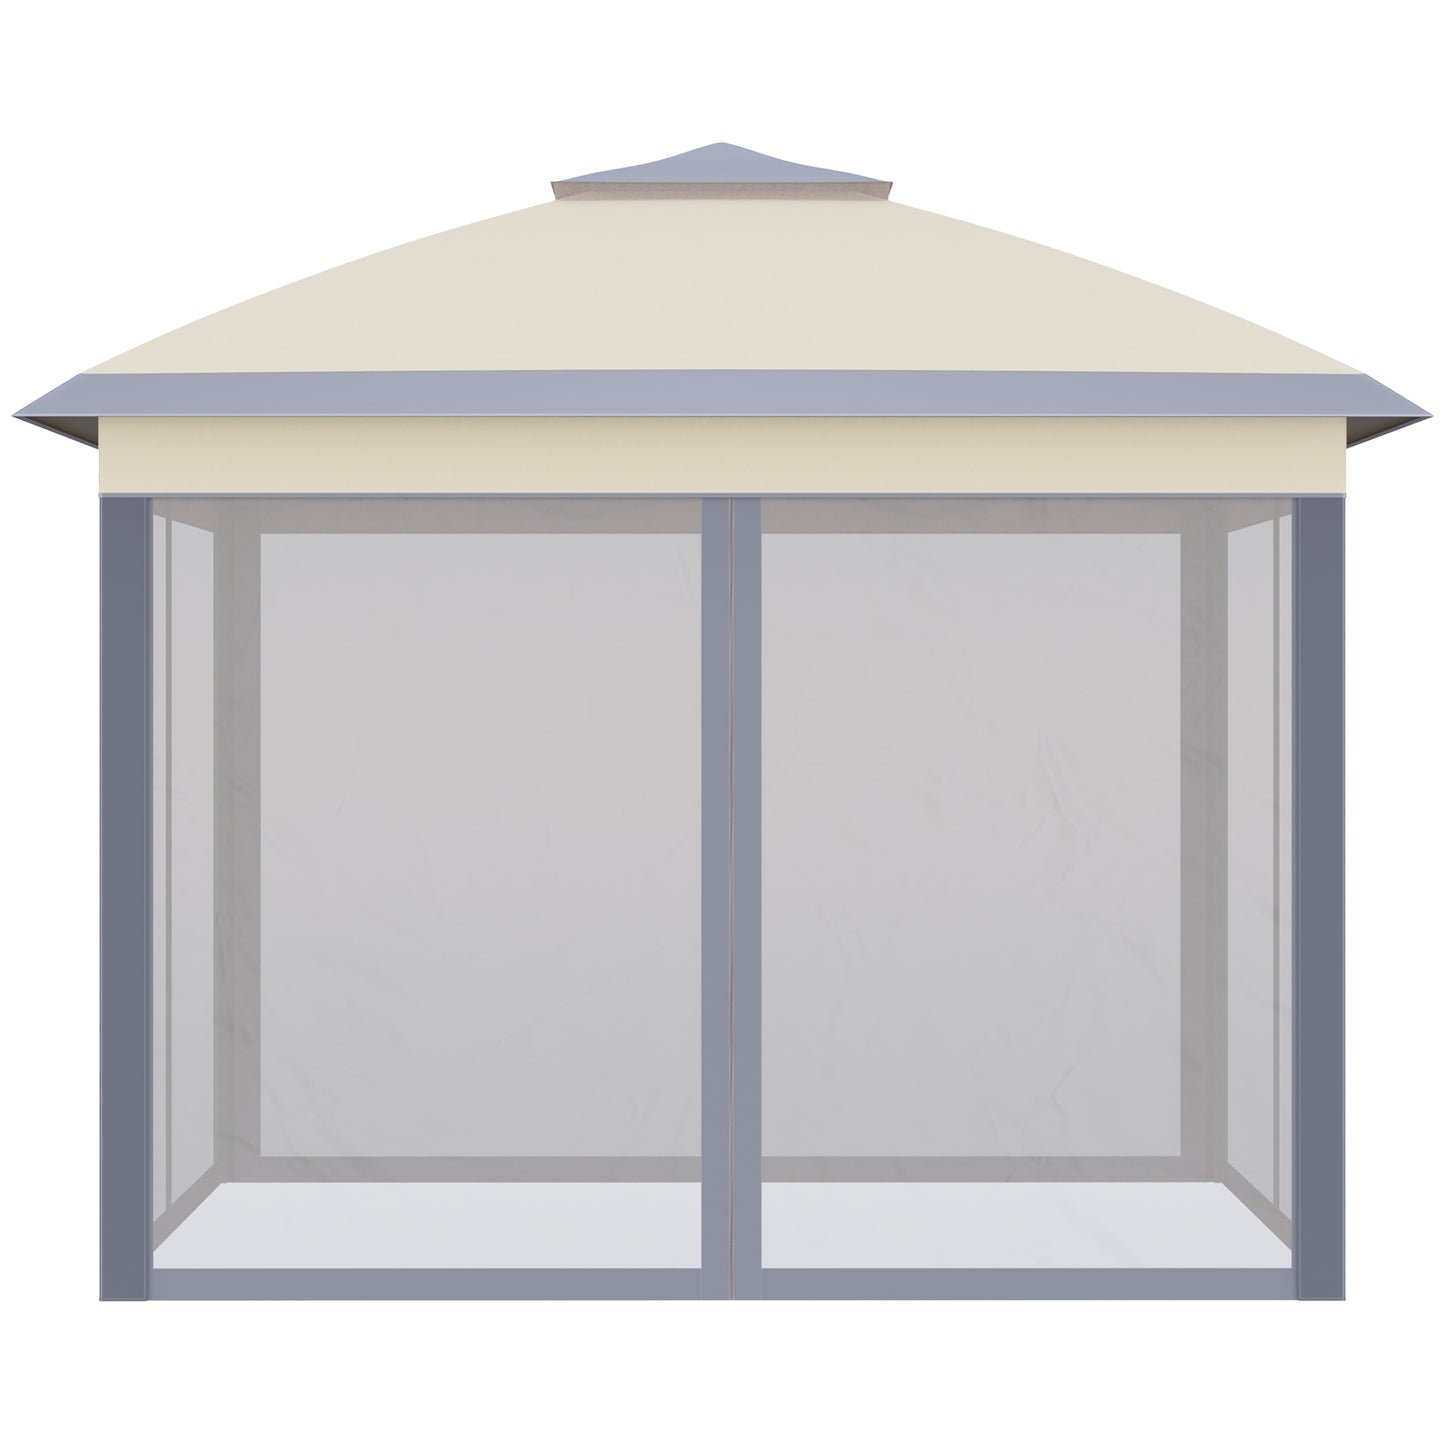 Outsunny Pop-Up Gazebo: 11' x 11' Double-Roof Shelter with Mesh Sidewalls, Adjustable Height & Carry Bag, Beige